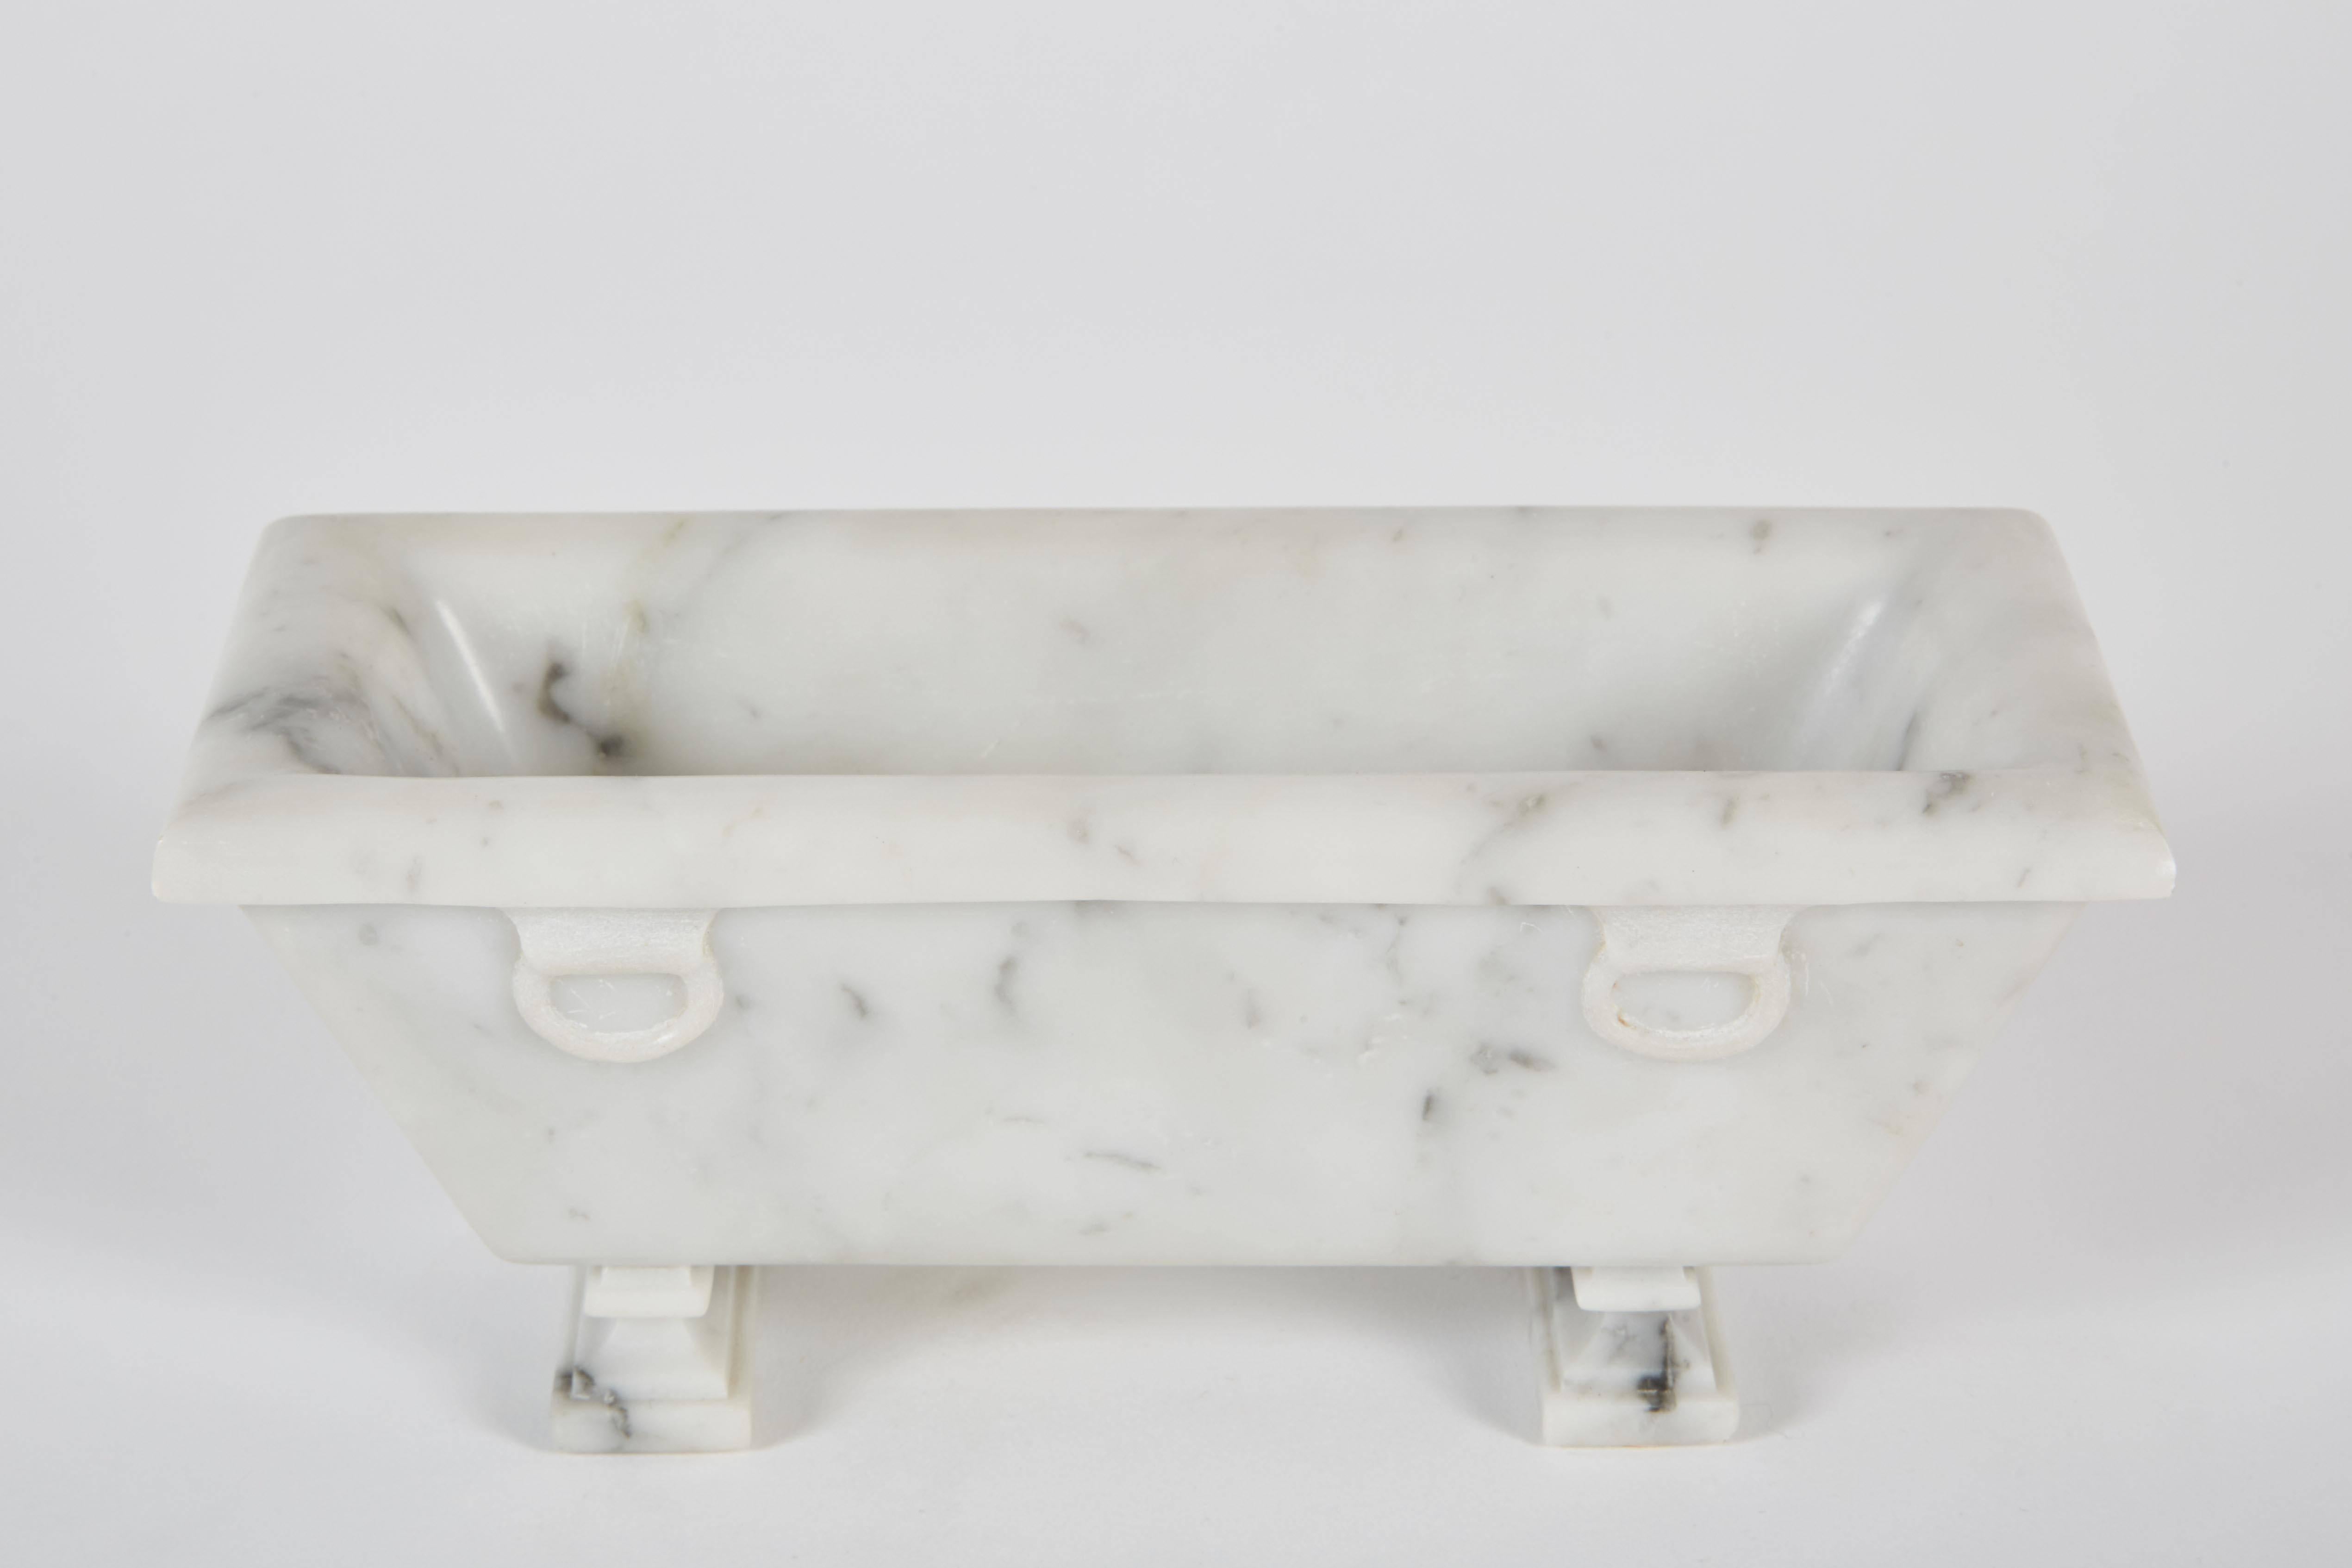 19th century Italian Grand Tour miniature Italian veined white marble model of sarcophagus with lion head stands only 3 inches high. The marble of this model is Bianco di Carrara and represents a small bathtub. This would have been originally